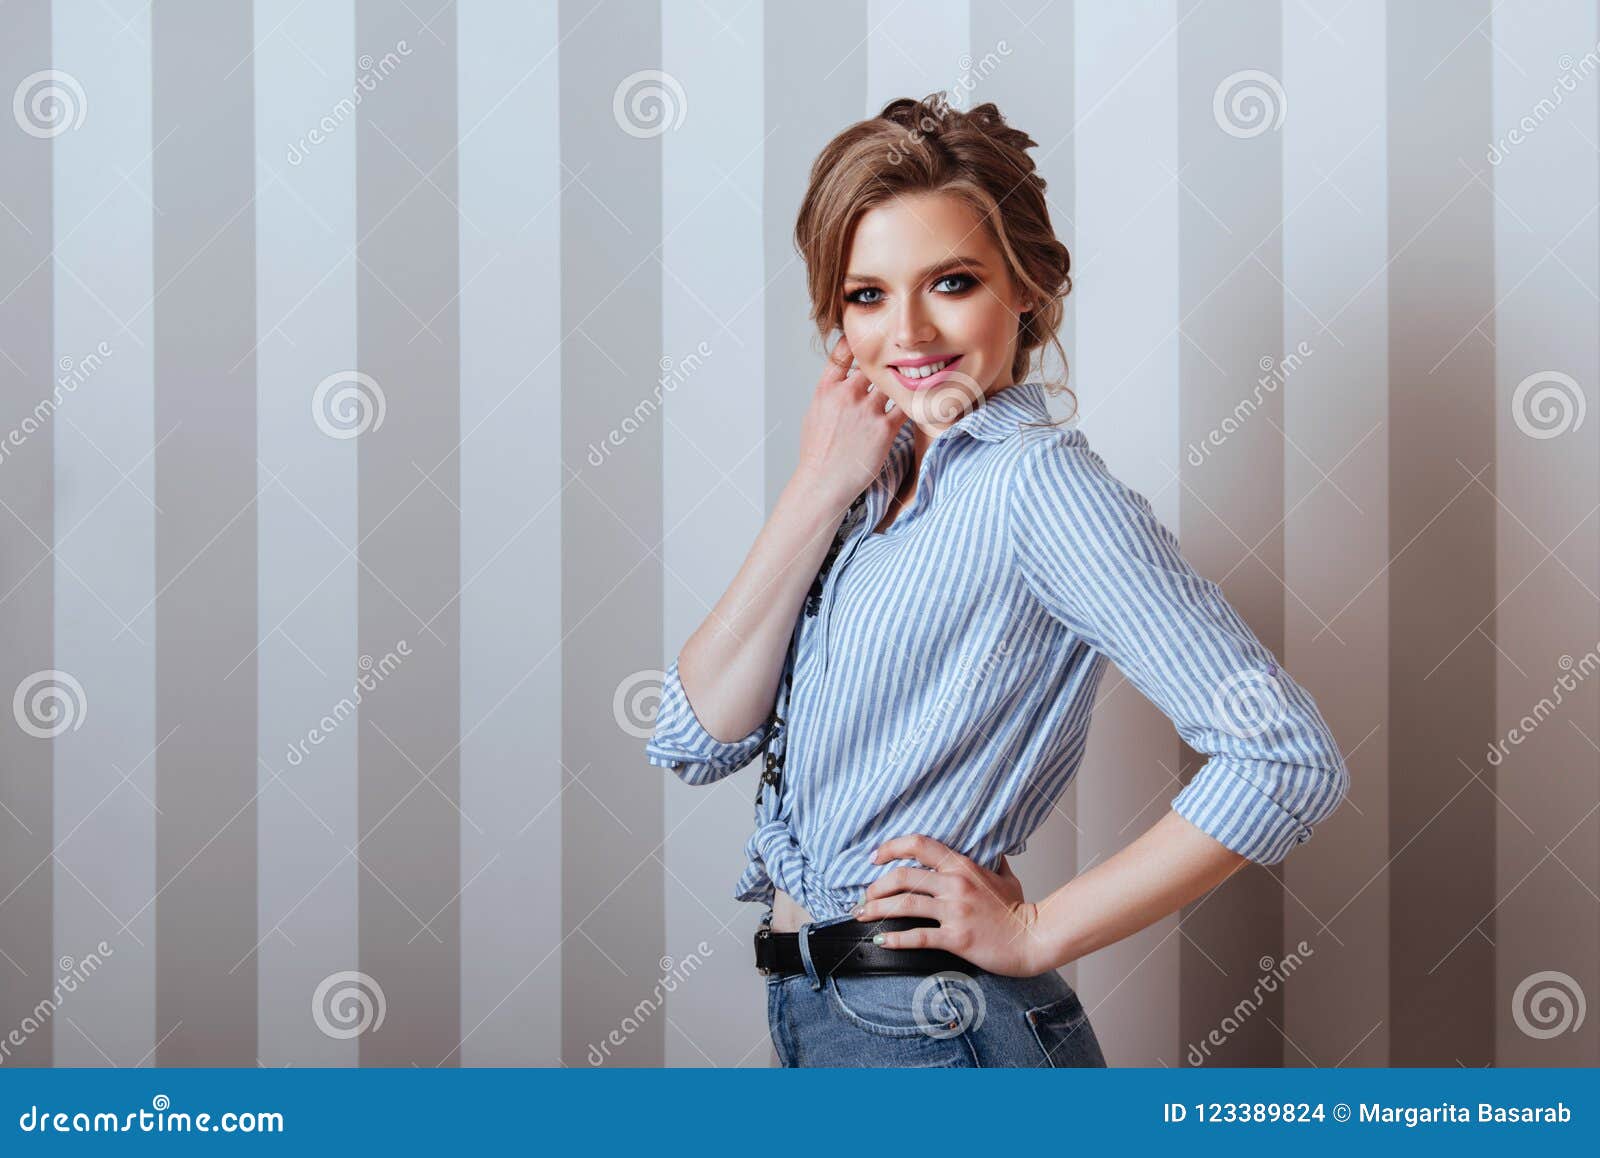 Portrait of Young Beautiful Cute Cheerful Girl Smiling. Stock Photo ...